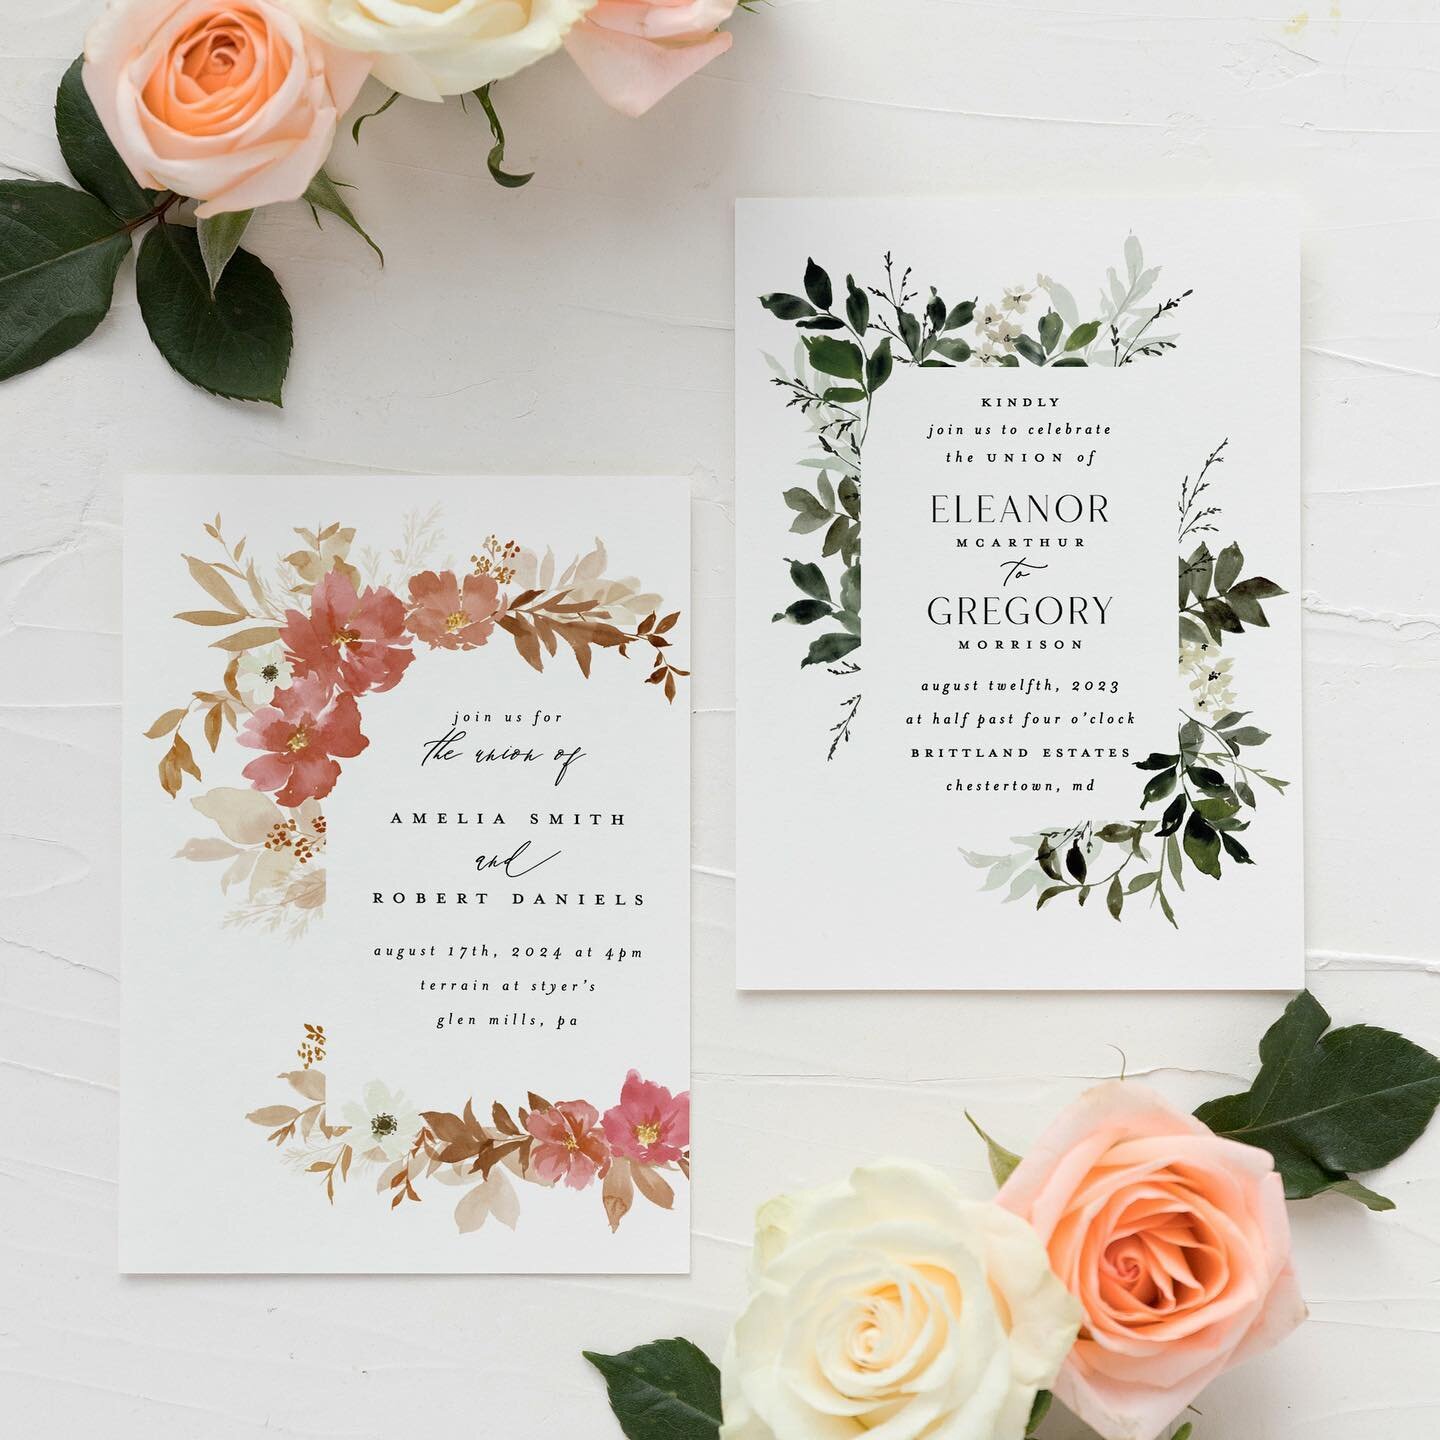 Longer days have me feeling optimistic, even if we're expecting snow in Scotland this week! Looking forward to spring blooms and spending time outside.⁠
⁠
I designed these wedding invitations for @minted challenge in late autumn, and I think they'd b